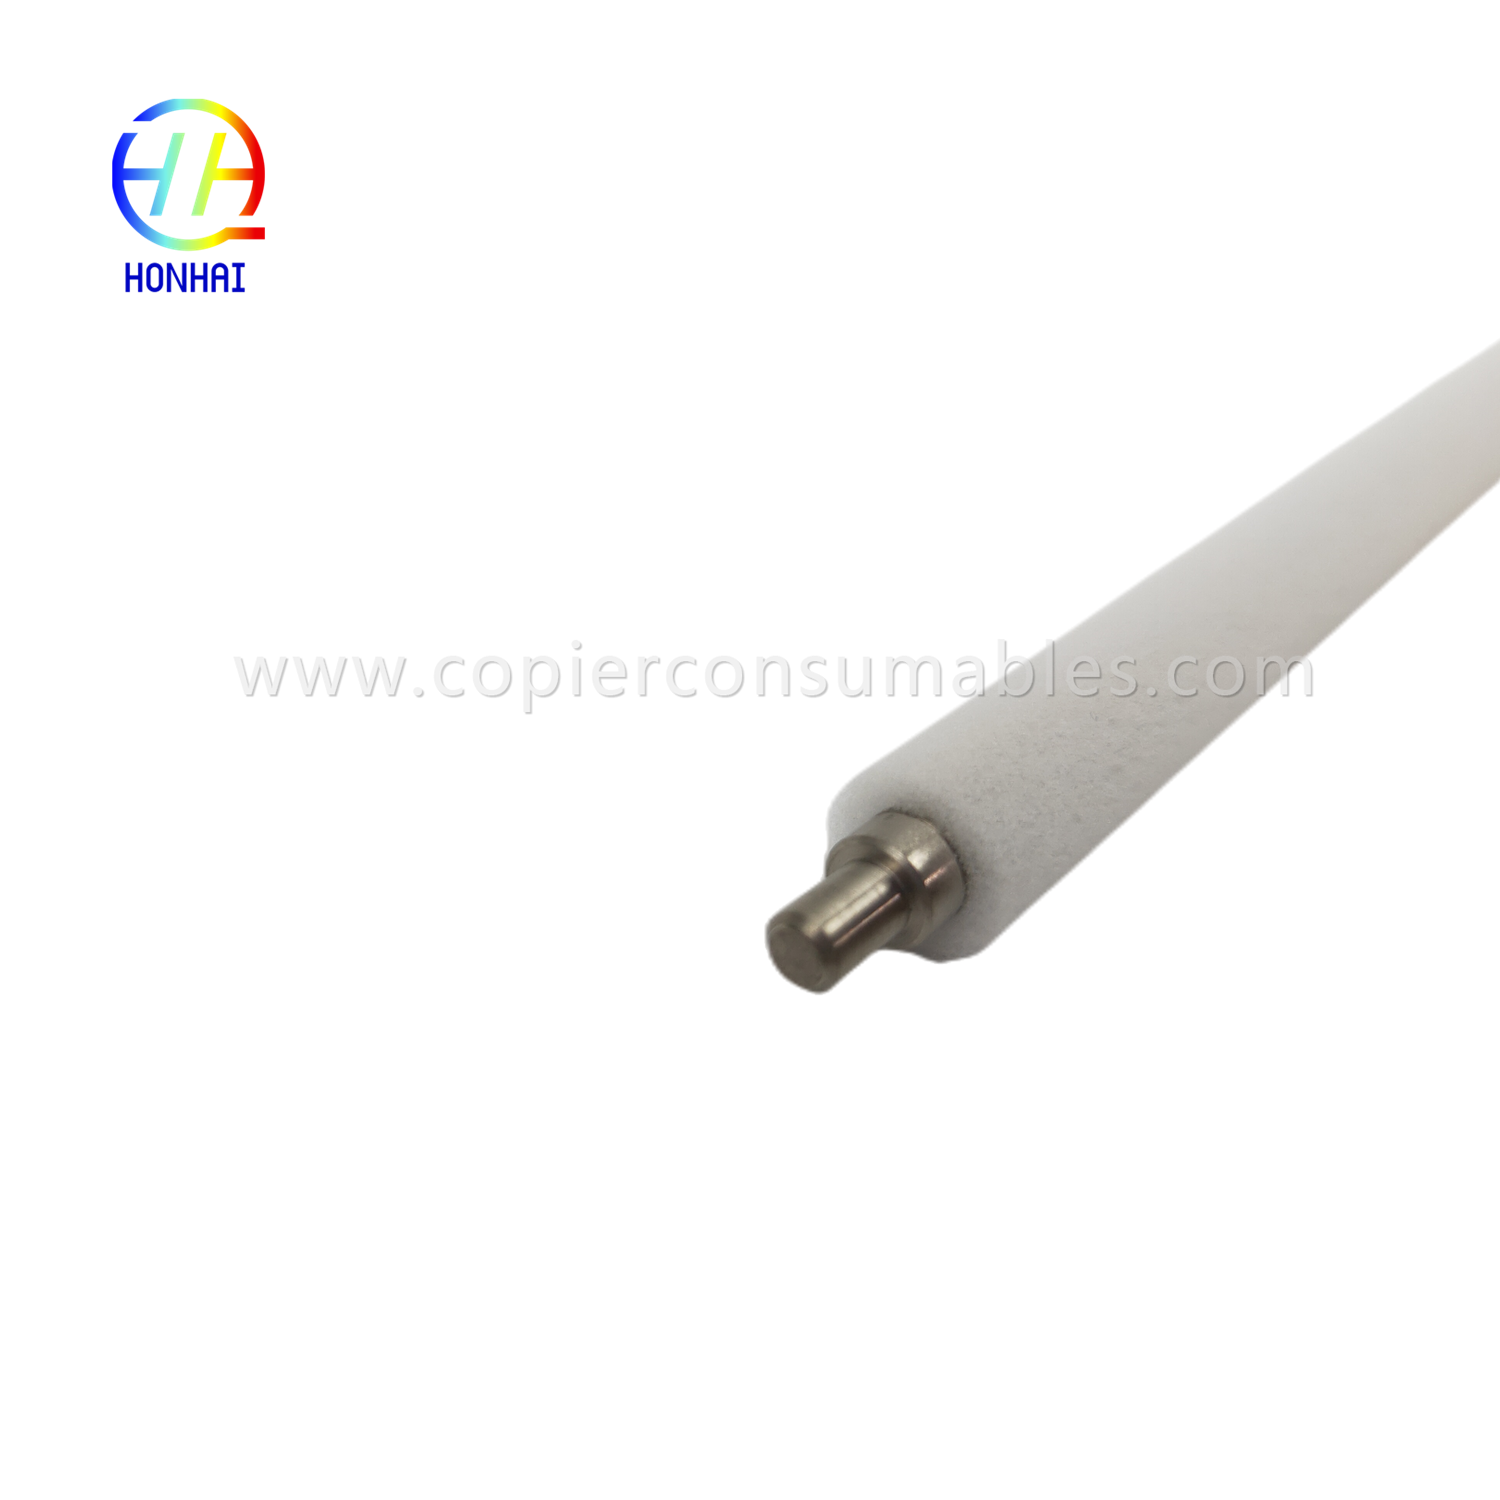 https://c585.goodao.net/pcr-cleaning-roller-for-ricoh-mpc3003-c3503-c4503-c5503-c6003-product/